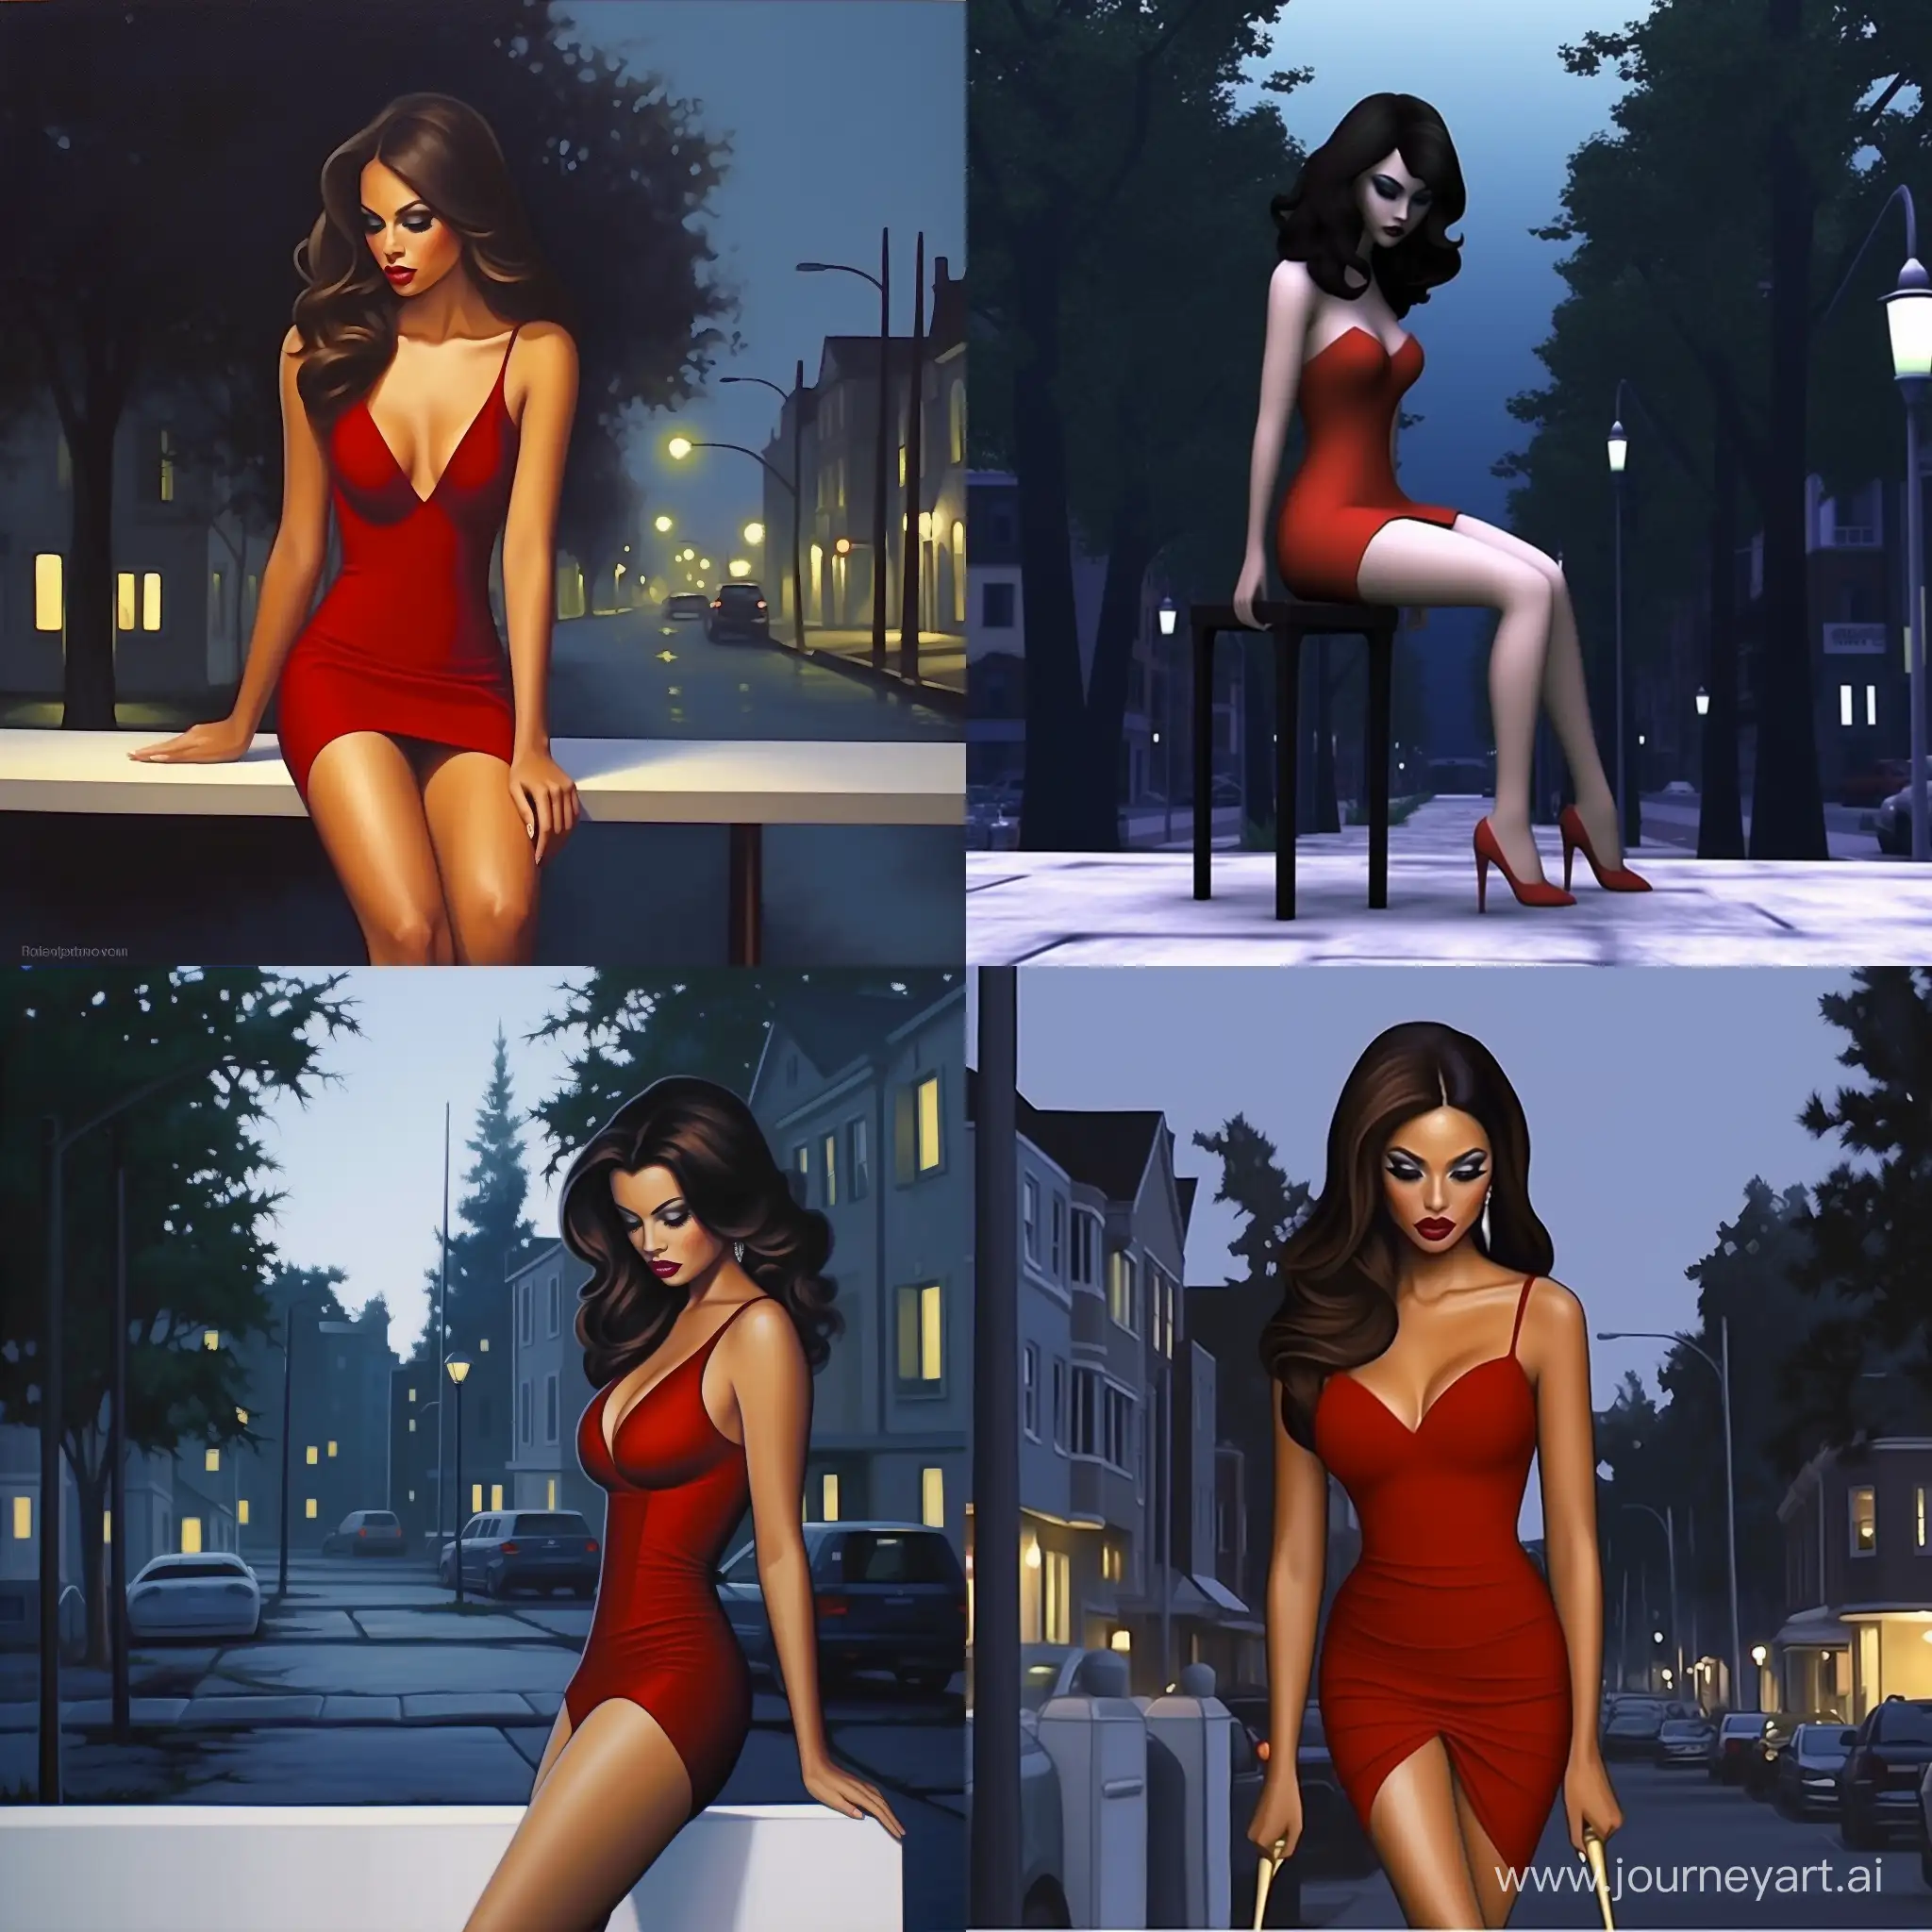 Elegant-Evening-Stroll-Glamorous-Red-Dress-and-High-Heels-in-City-Lights